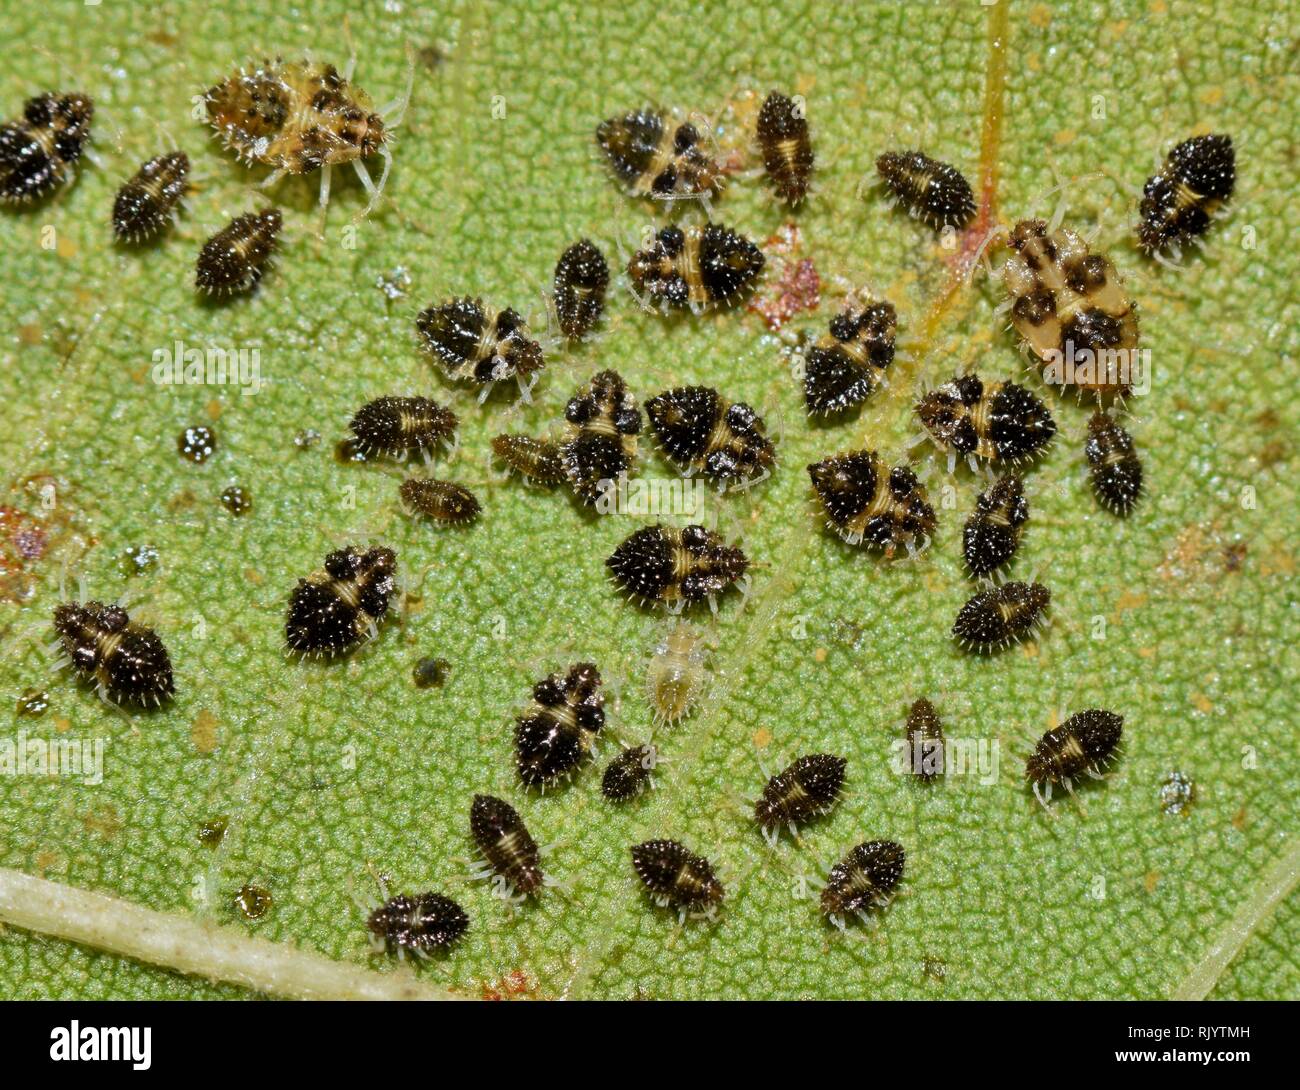 A batch of tiny Lace bugs (Corythucha marmorata) on the underside of a Maple leaf found in Houston TX during Springtime. Stock Photo